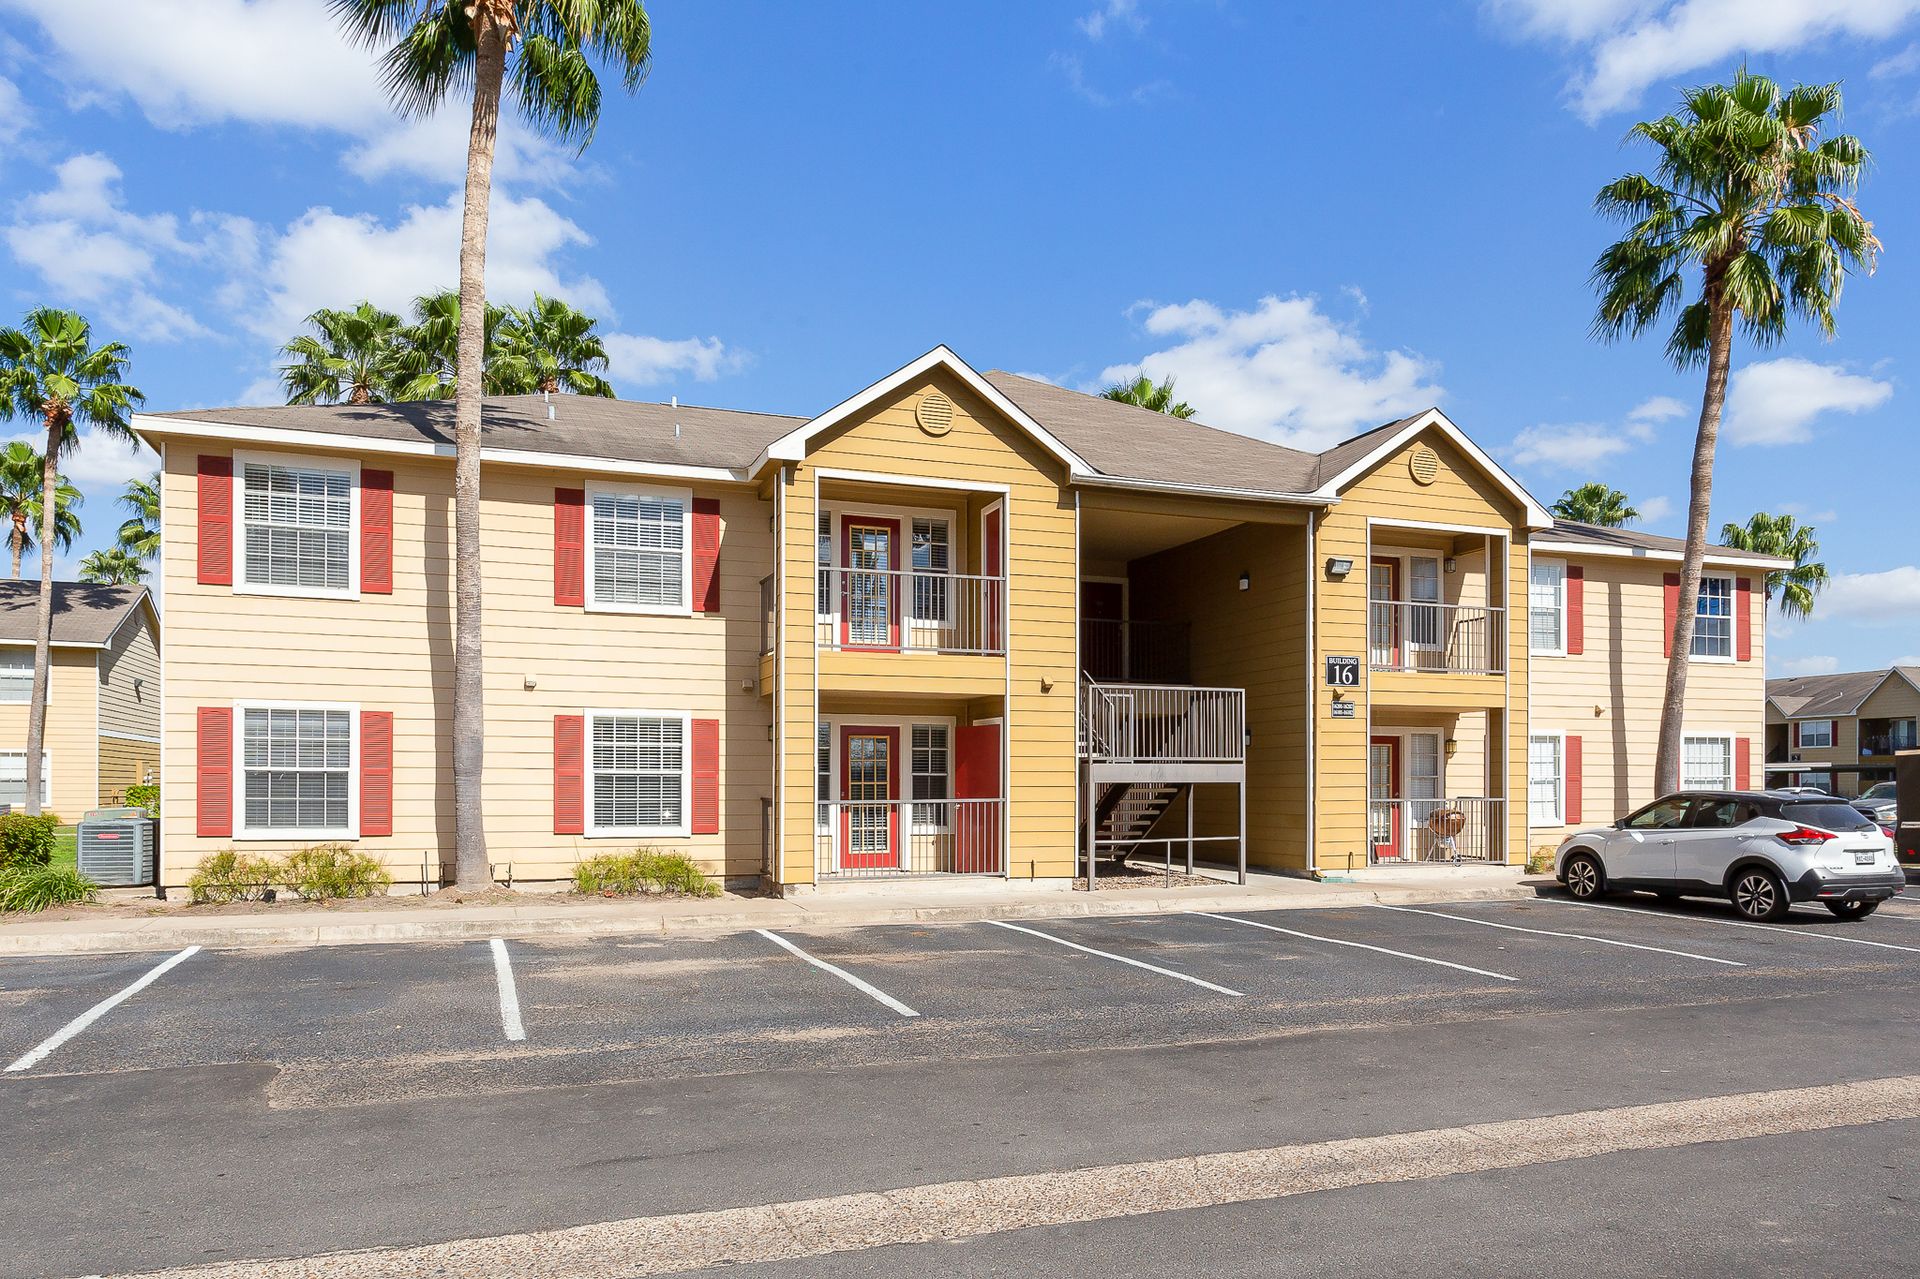 exterior of apartment building with parking and palm trees